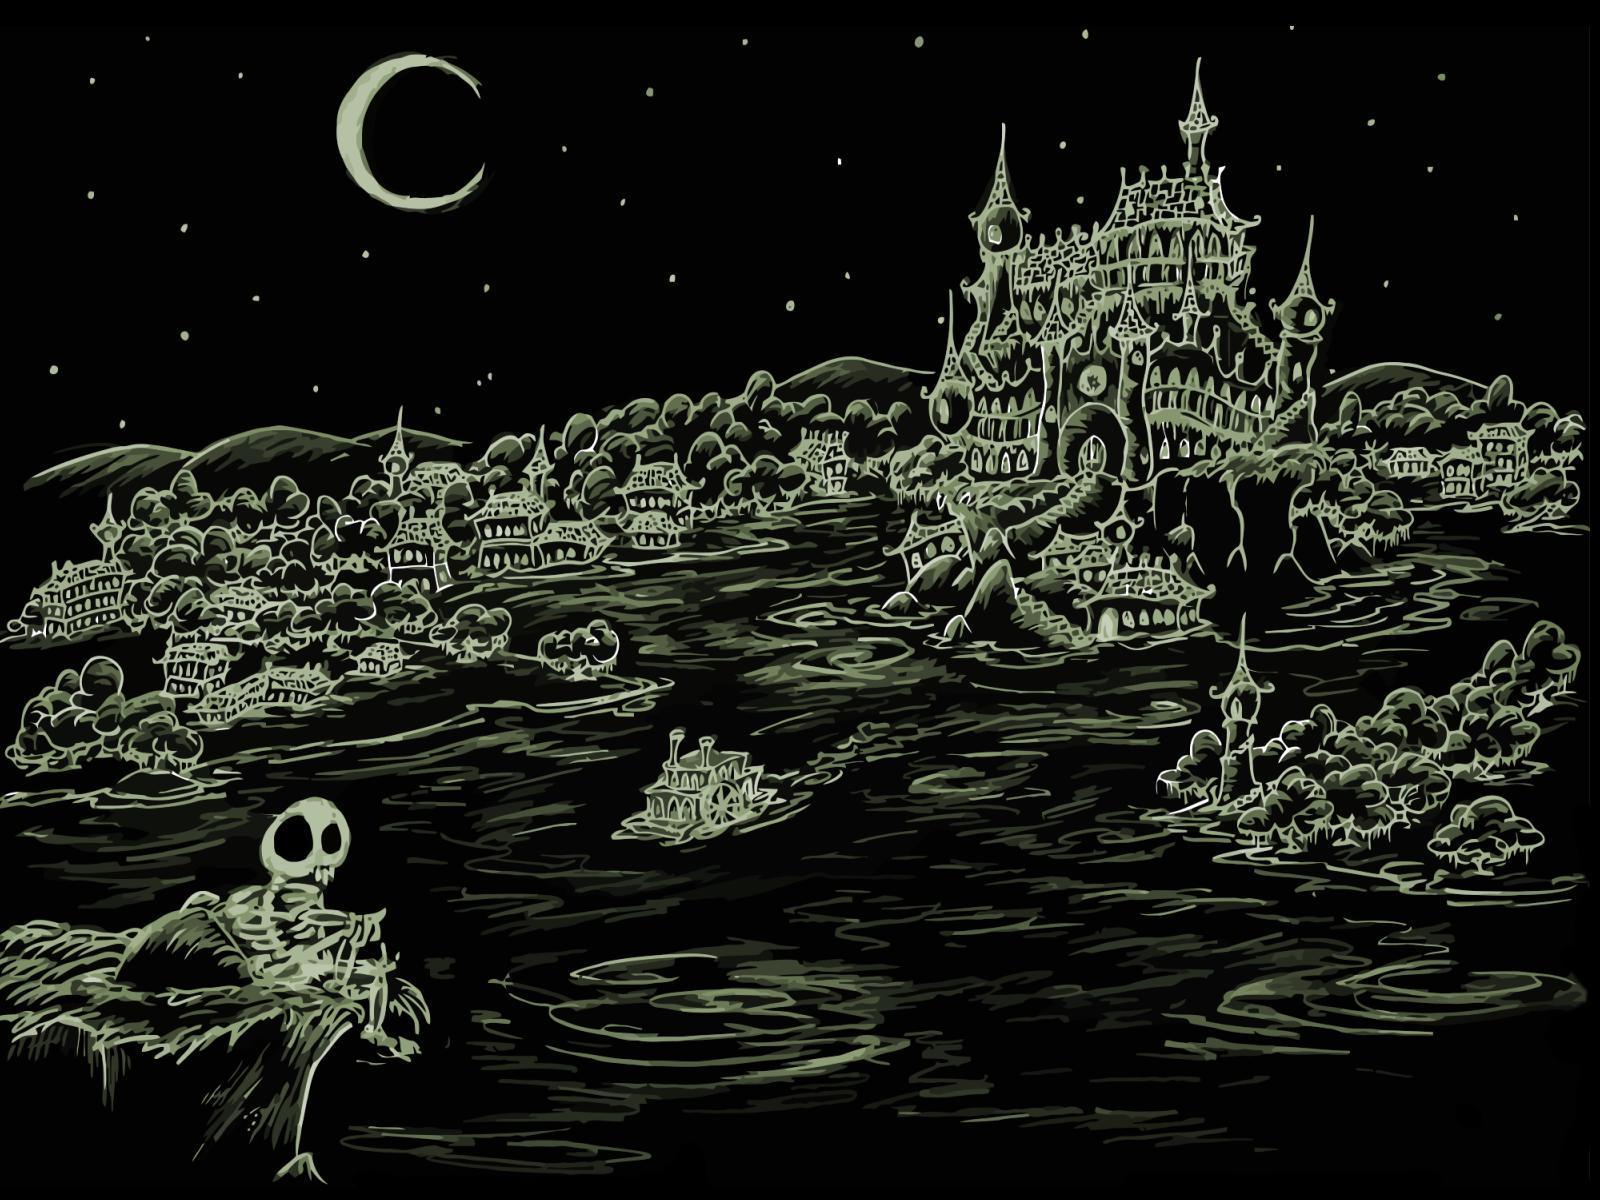 screen background: a skeleton looking over a haunted bay. bluebison